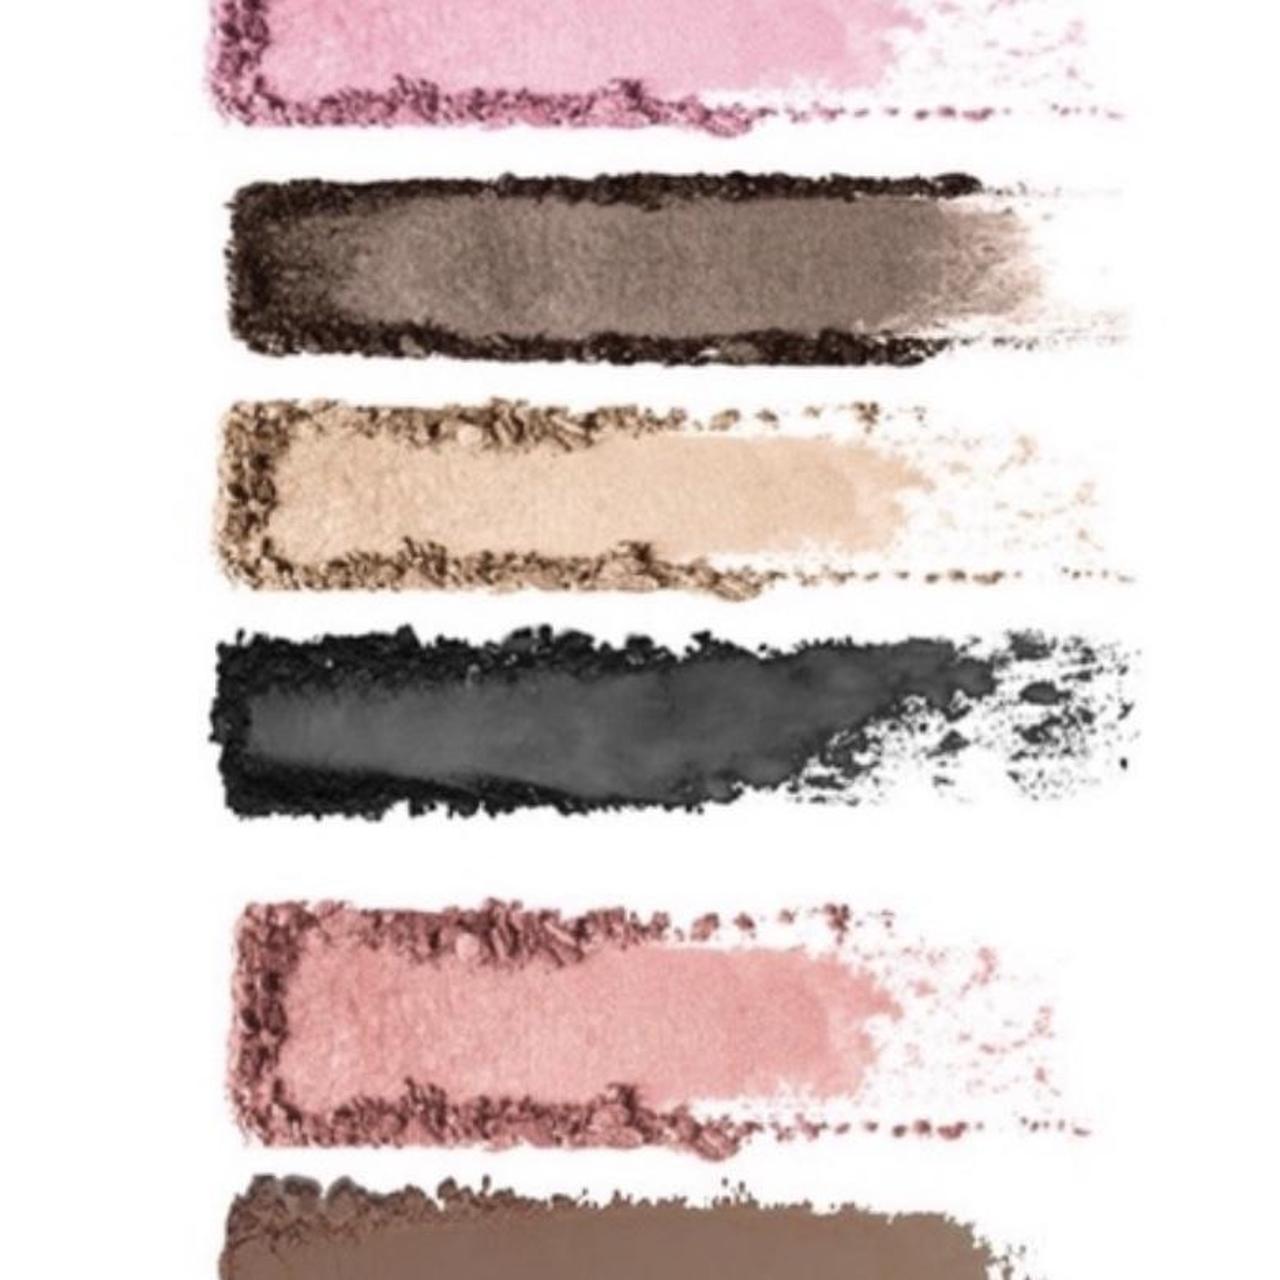 Product Image 3 - NEW LORAC L.A. PALETTE BEVERLY